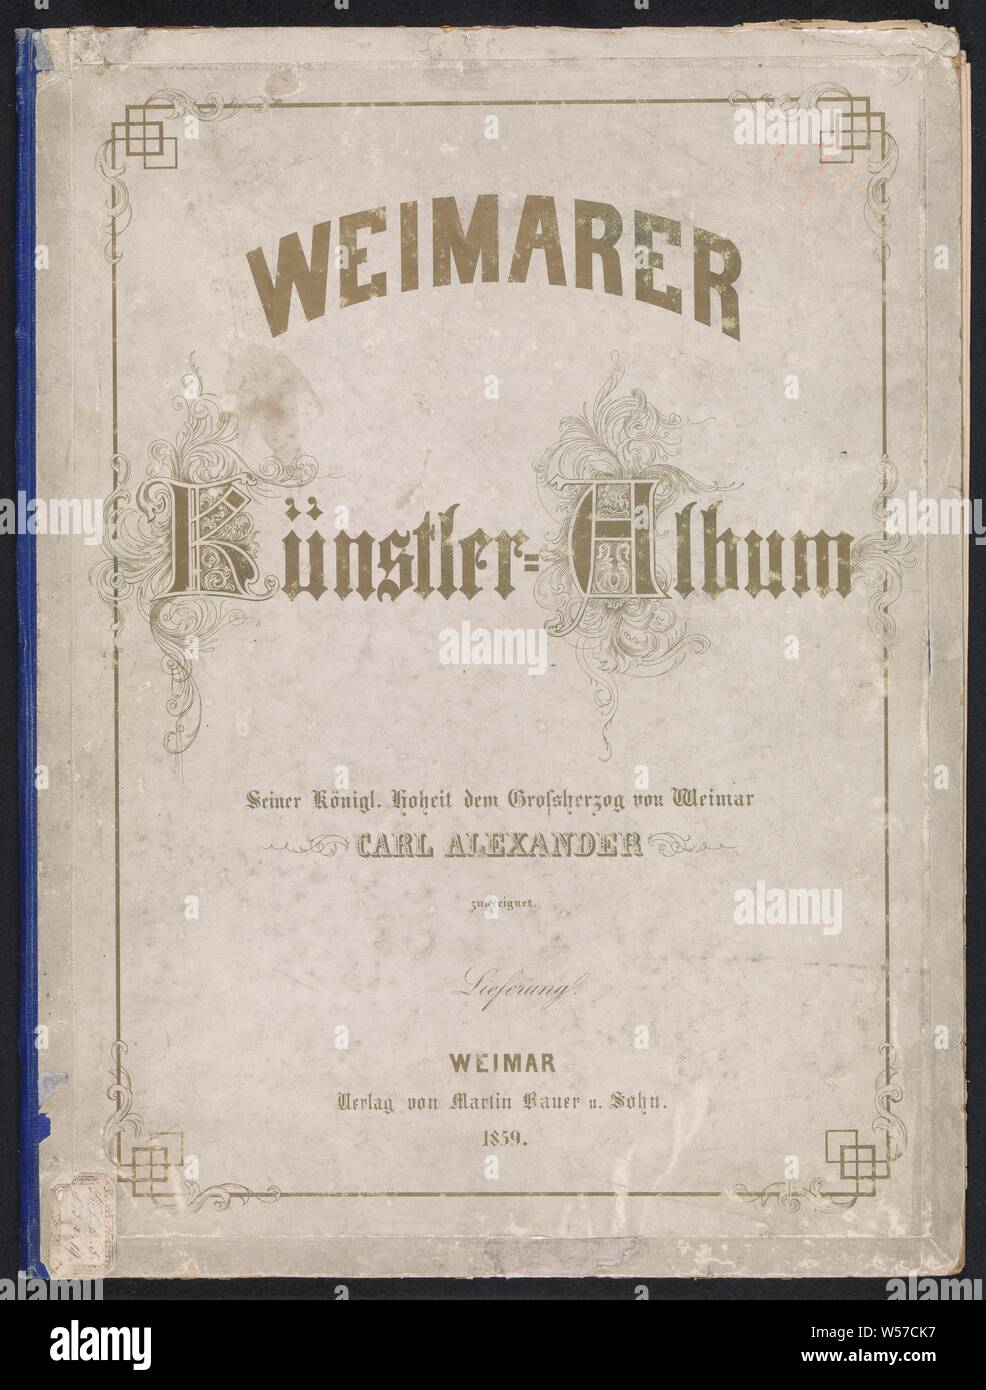 Weimarer Künstler-Album (title on object), landscapes with waters, waterscapes, seascapes (in the temperate zone), rural housing, eg country house, villa, cottage, bridge, 1859, paper, photographic paper, cardboard, albumen print, h 420 mm × w 315 mm × t 6 mm Stock Photo